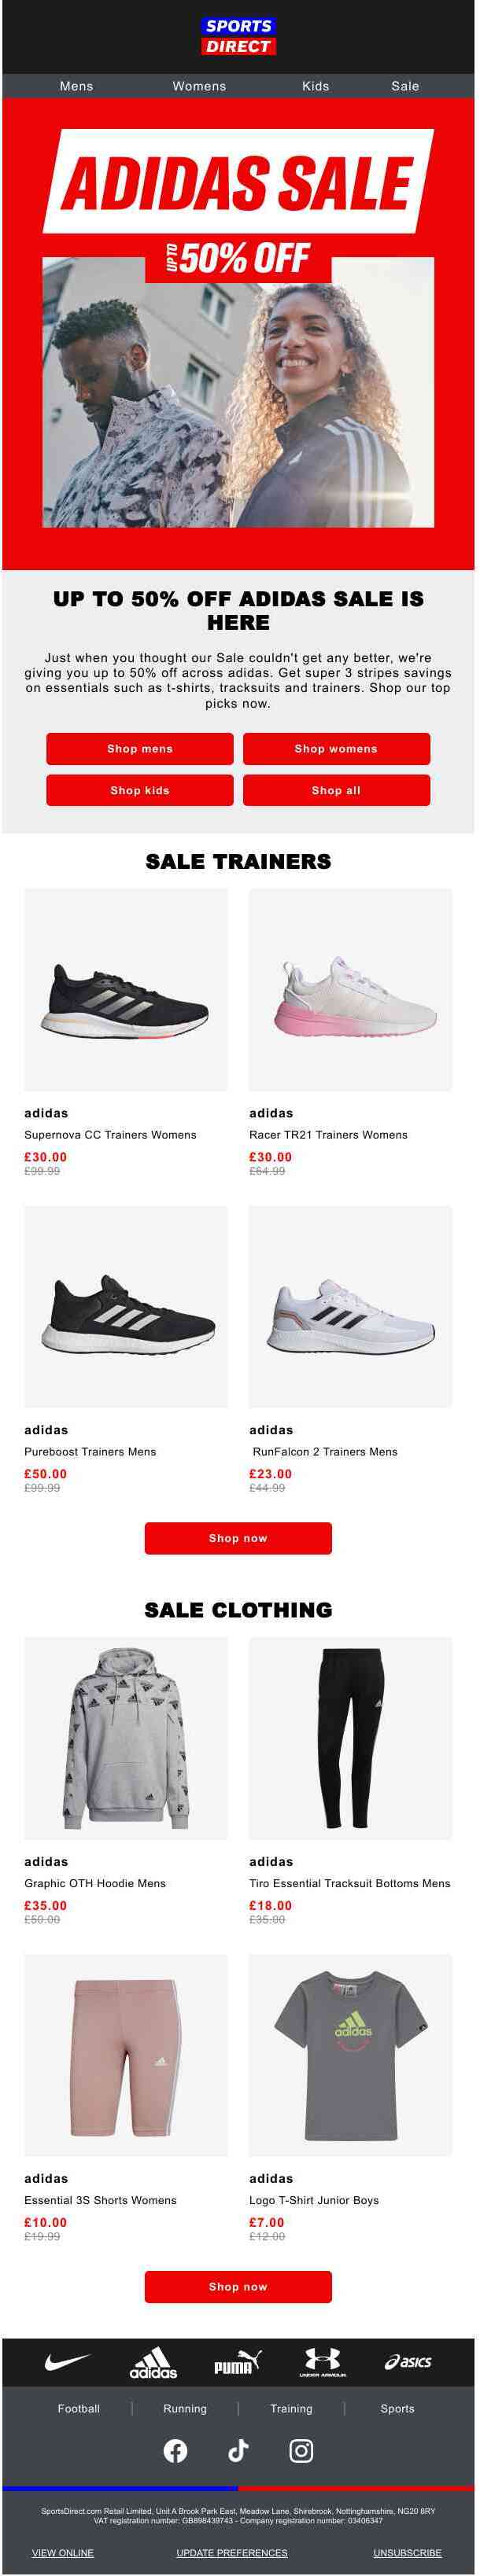 ⚡ Best of adidas Sale: UP TO 50% OFF ⚡